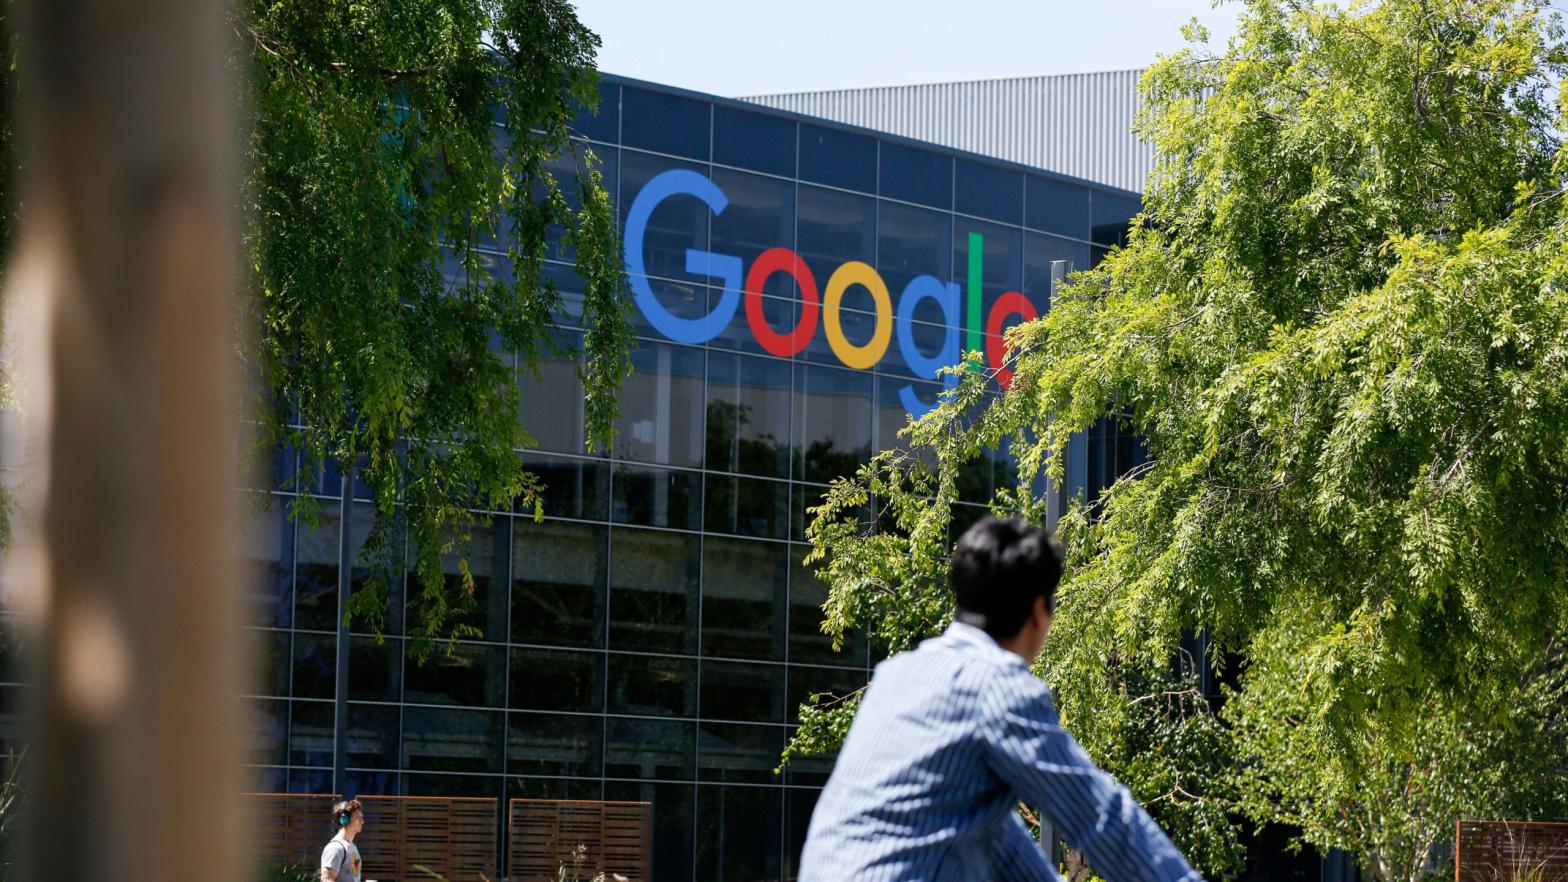 File photo of Google's main campus in Mountain View, California in 2019. (Photo: Amy Osborne, Getty Images)